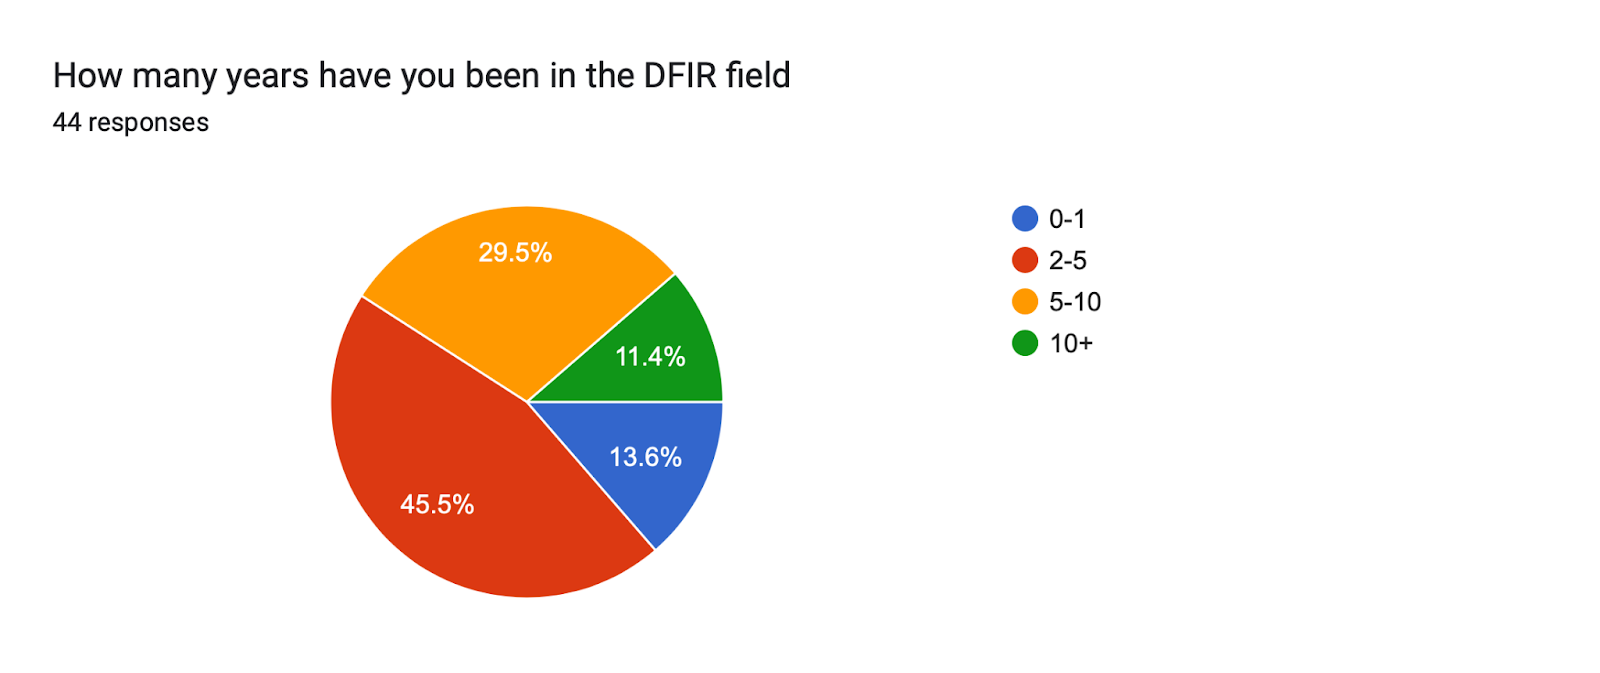 Forms response chart. Question title: How many years have you been in the DFIR field. Number of responses: 44 responses.